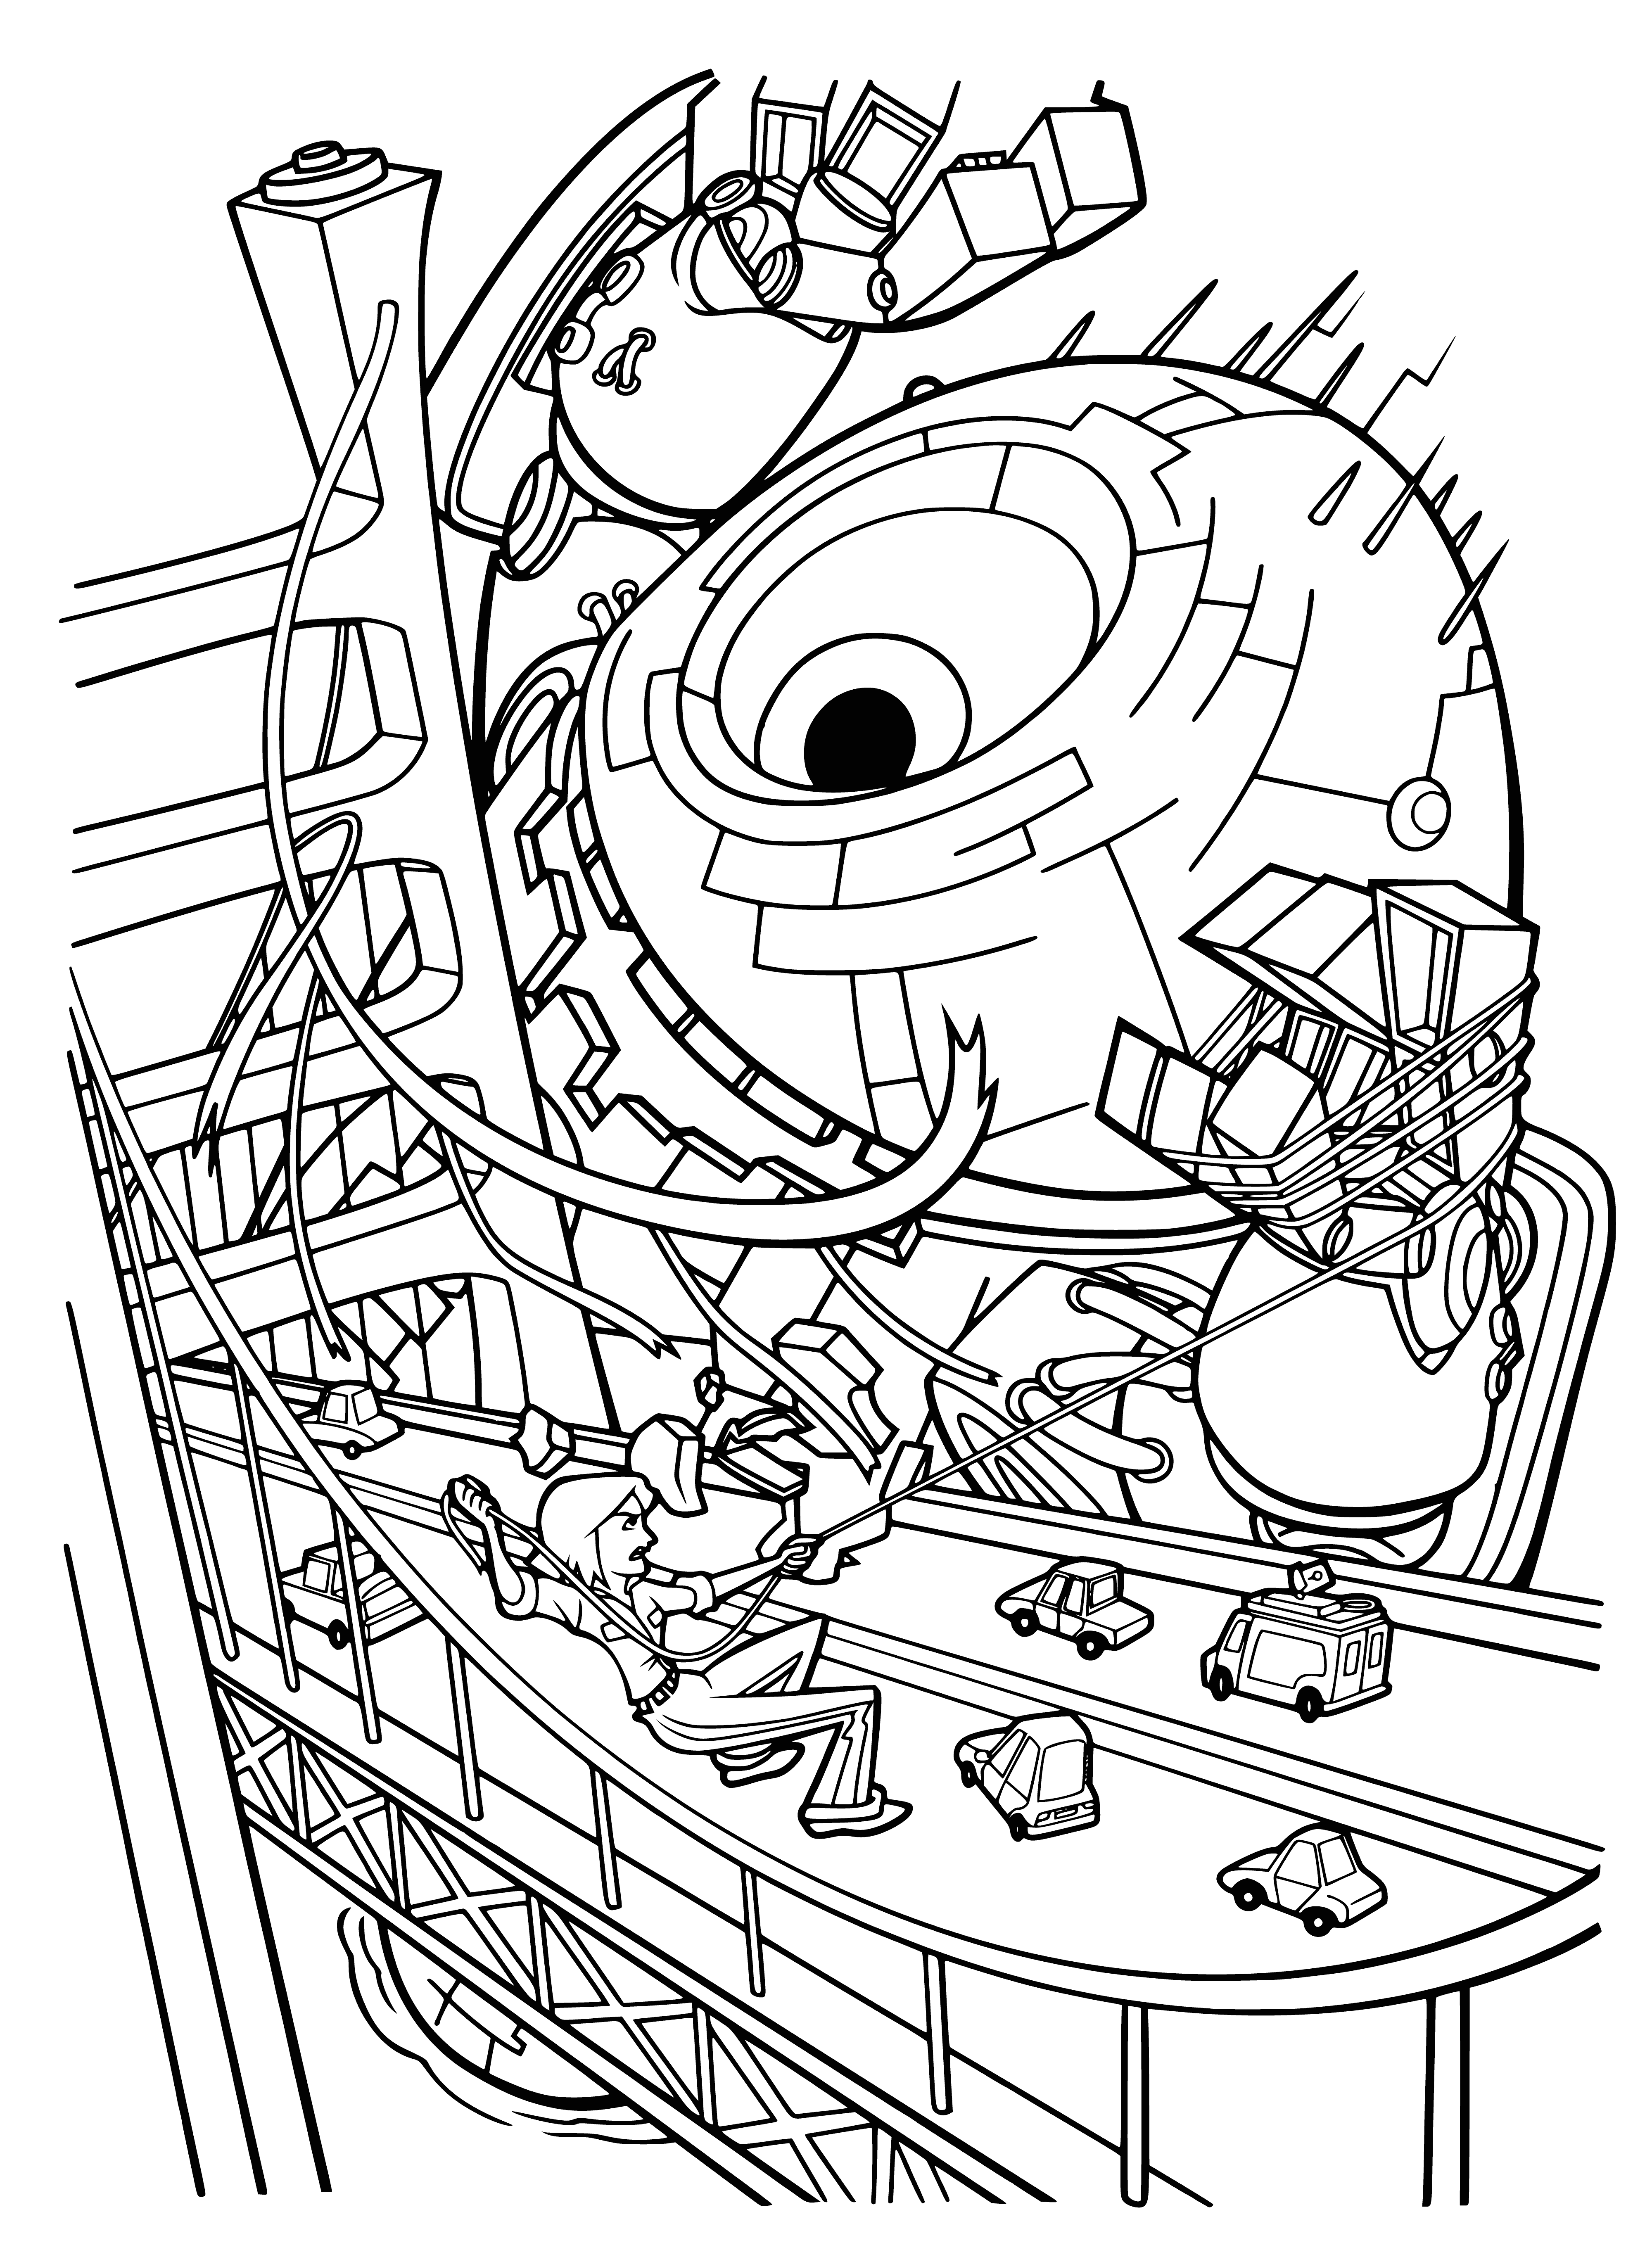 coloring page: Robot vs. monsters & aliens with umbrellas on a page - who will win?